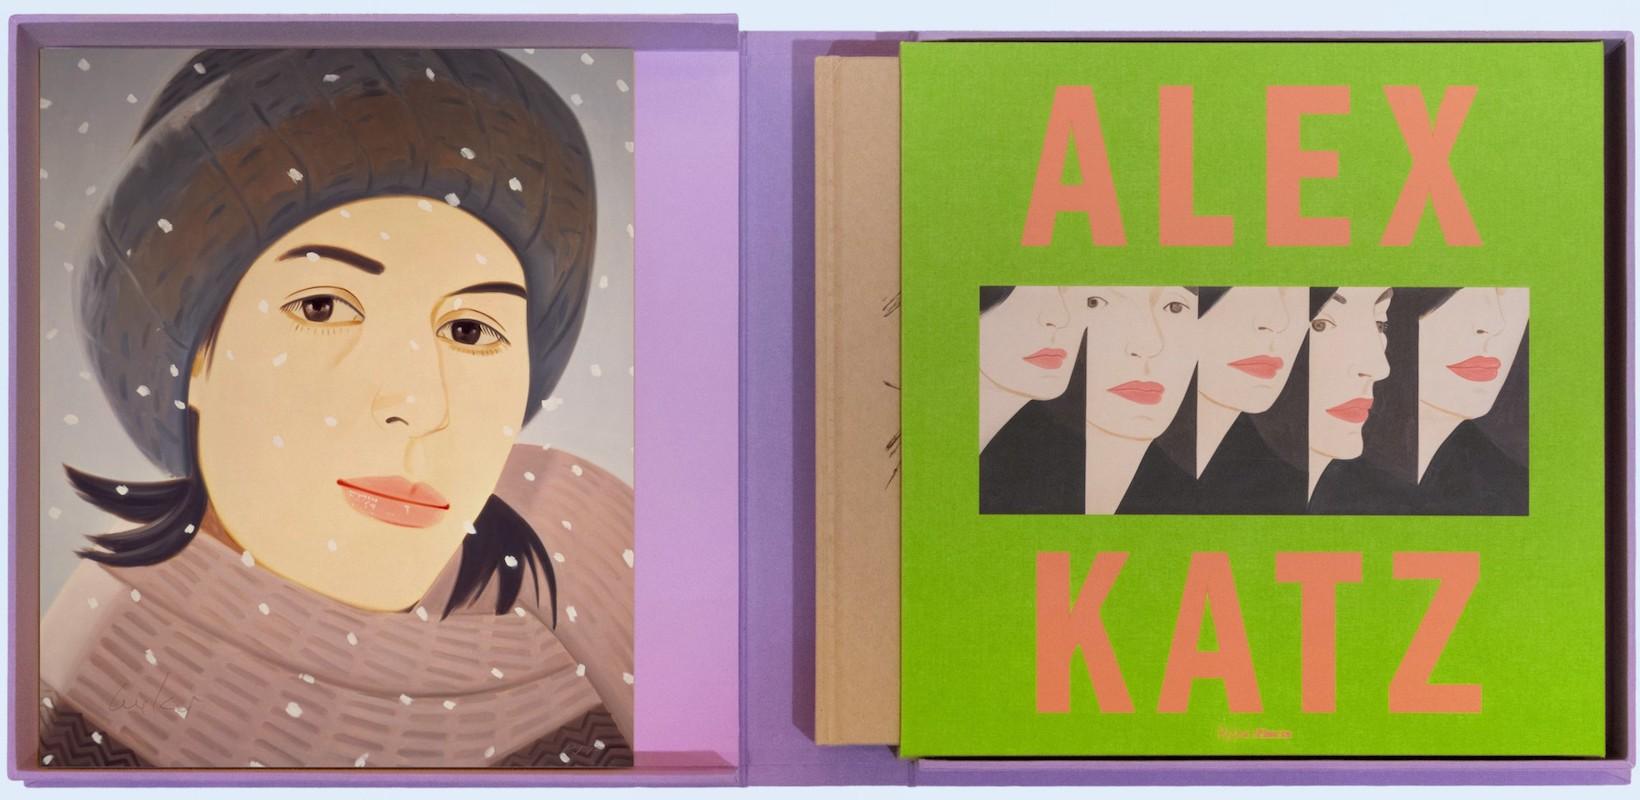 A spectacular new release by Alex Katz, December (Ada), is a stunning print hand-signed by the artist in pencil, and numbered, measuring 11 ½ x 9 ½ in. (29 x 24 cm), unframed, from the edition of 100 accompanied by the limited edition book published